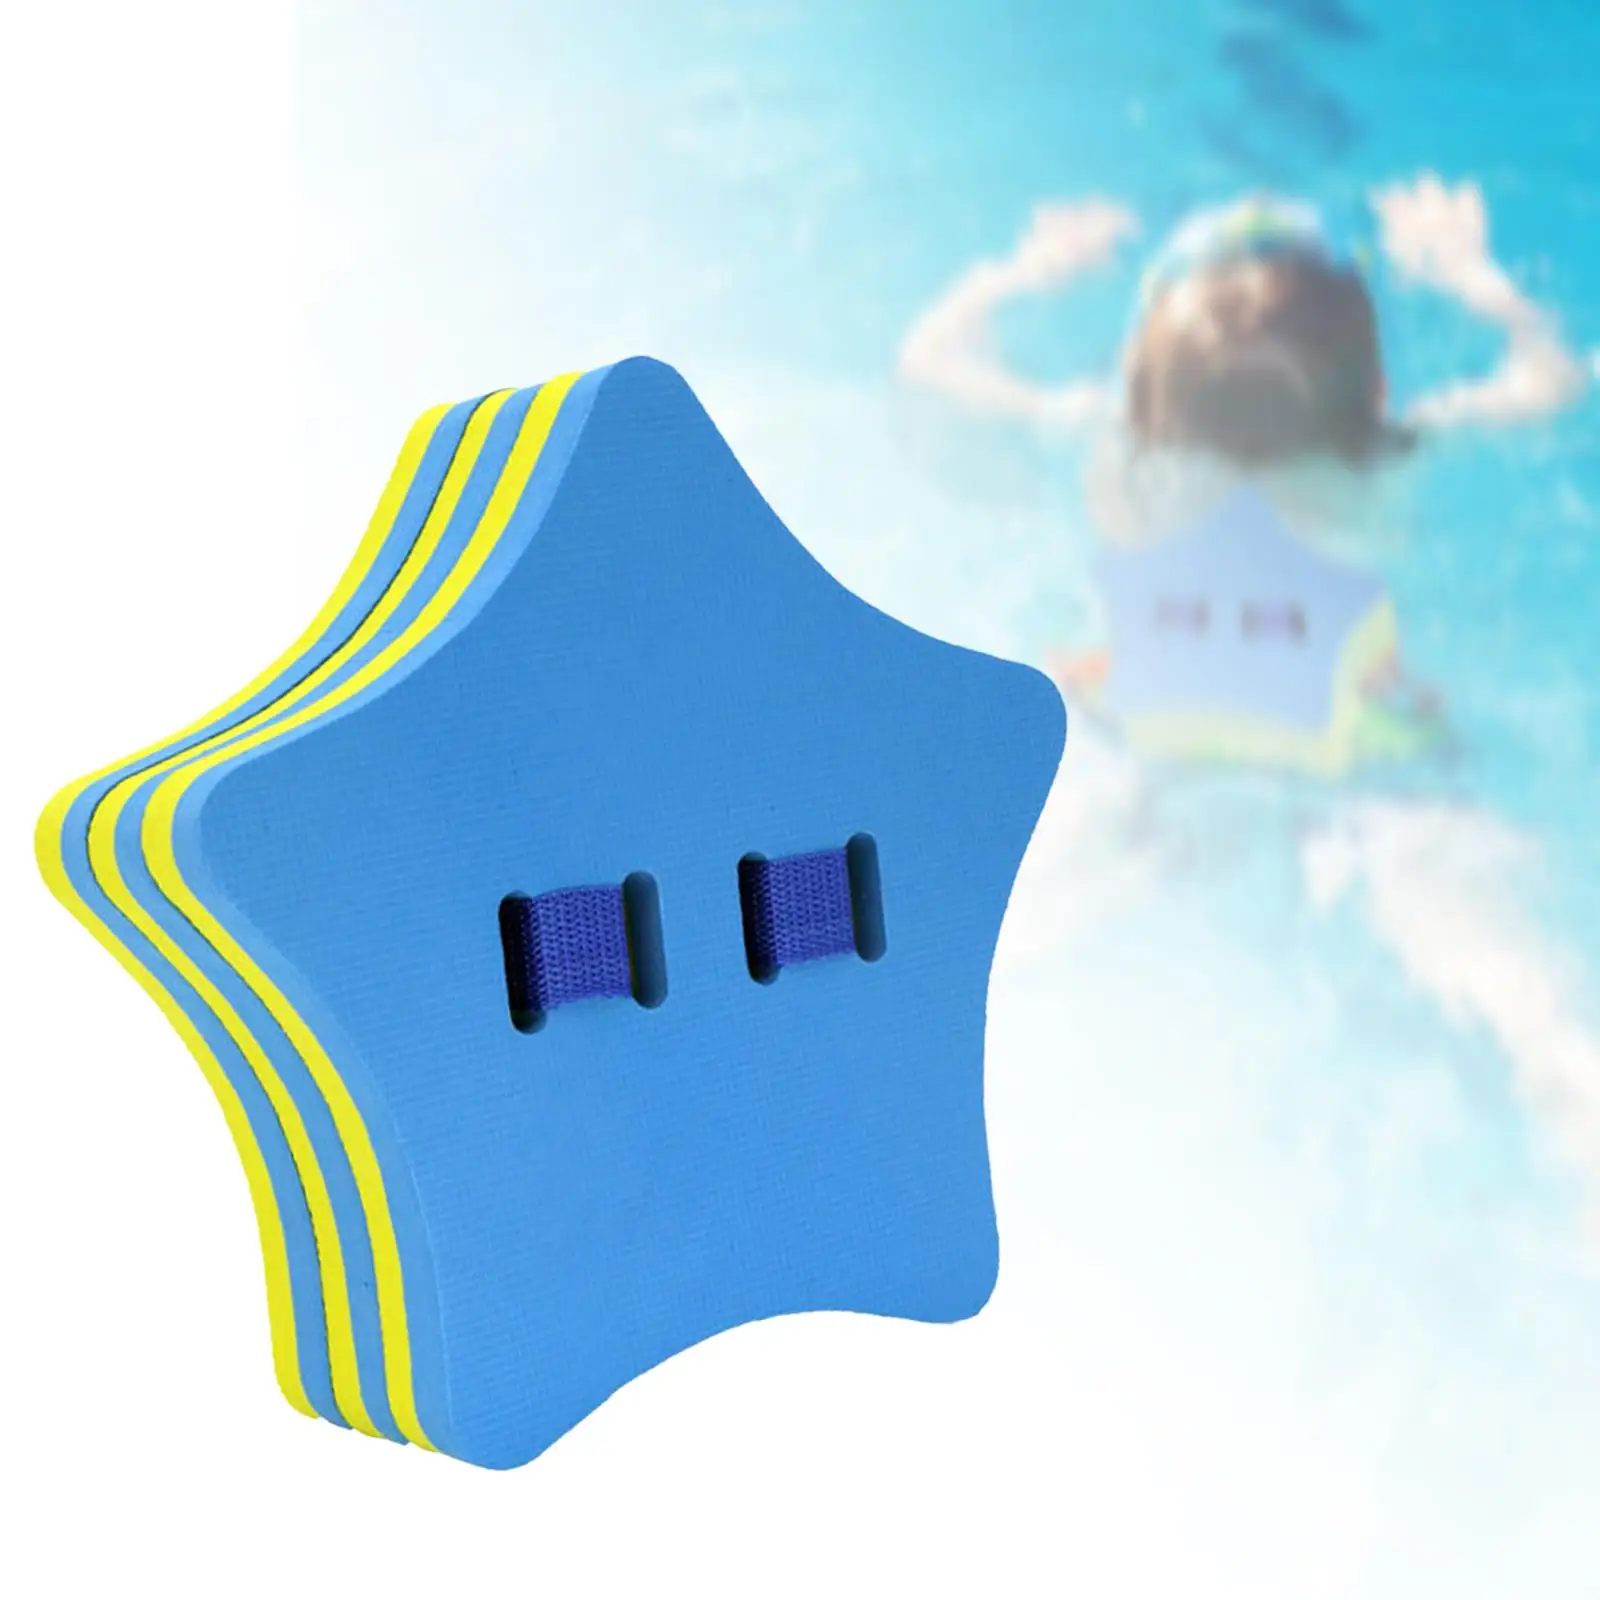 Adjustable Back foam floating Belt Waist Floating Board Safety Learn swimming Lightweight for Swimmers Pool Accessories